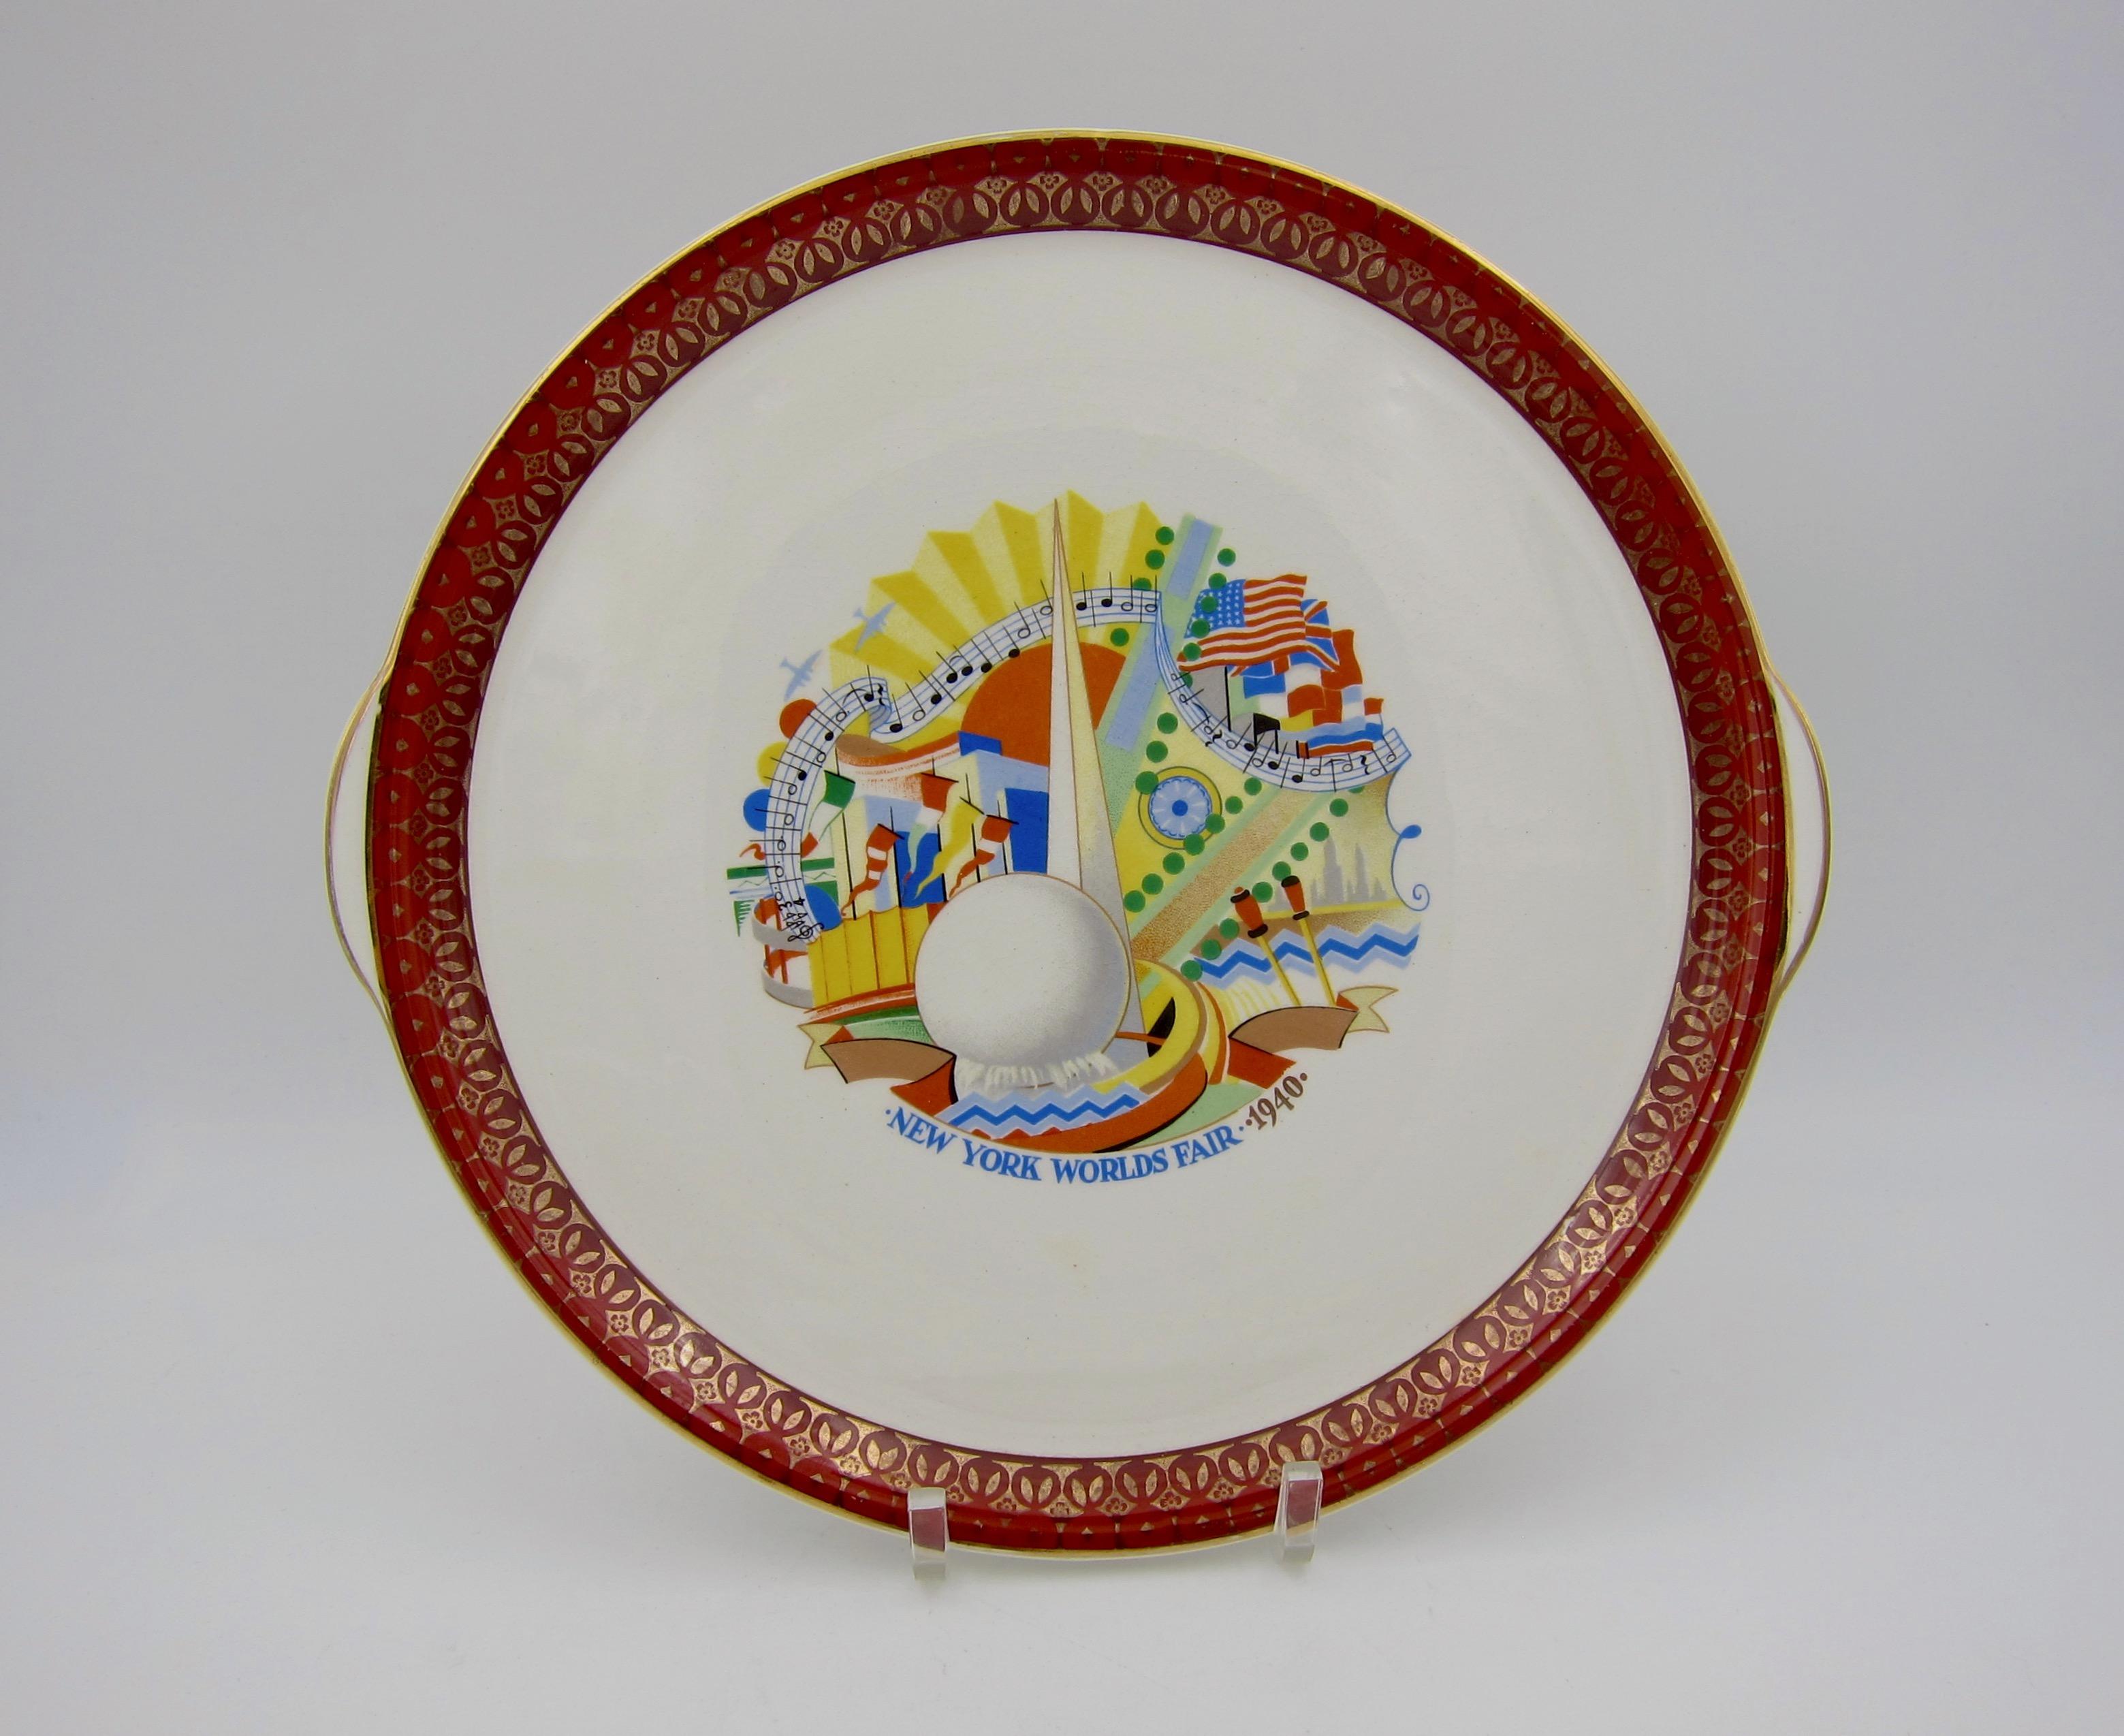 An Art Deco platter from the 1939-1940 New York World's Fair produced by The Cronin China Company of Minerva, Ohio (1934-1956) for the National Brotherhood of Operative Potters Exhibit. This vintage serving platter features a crisp and colorful